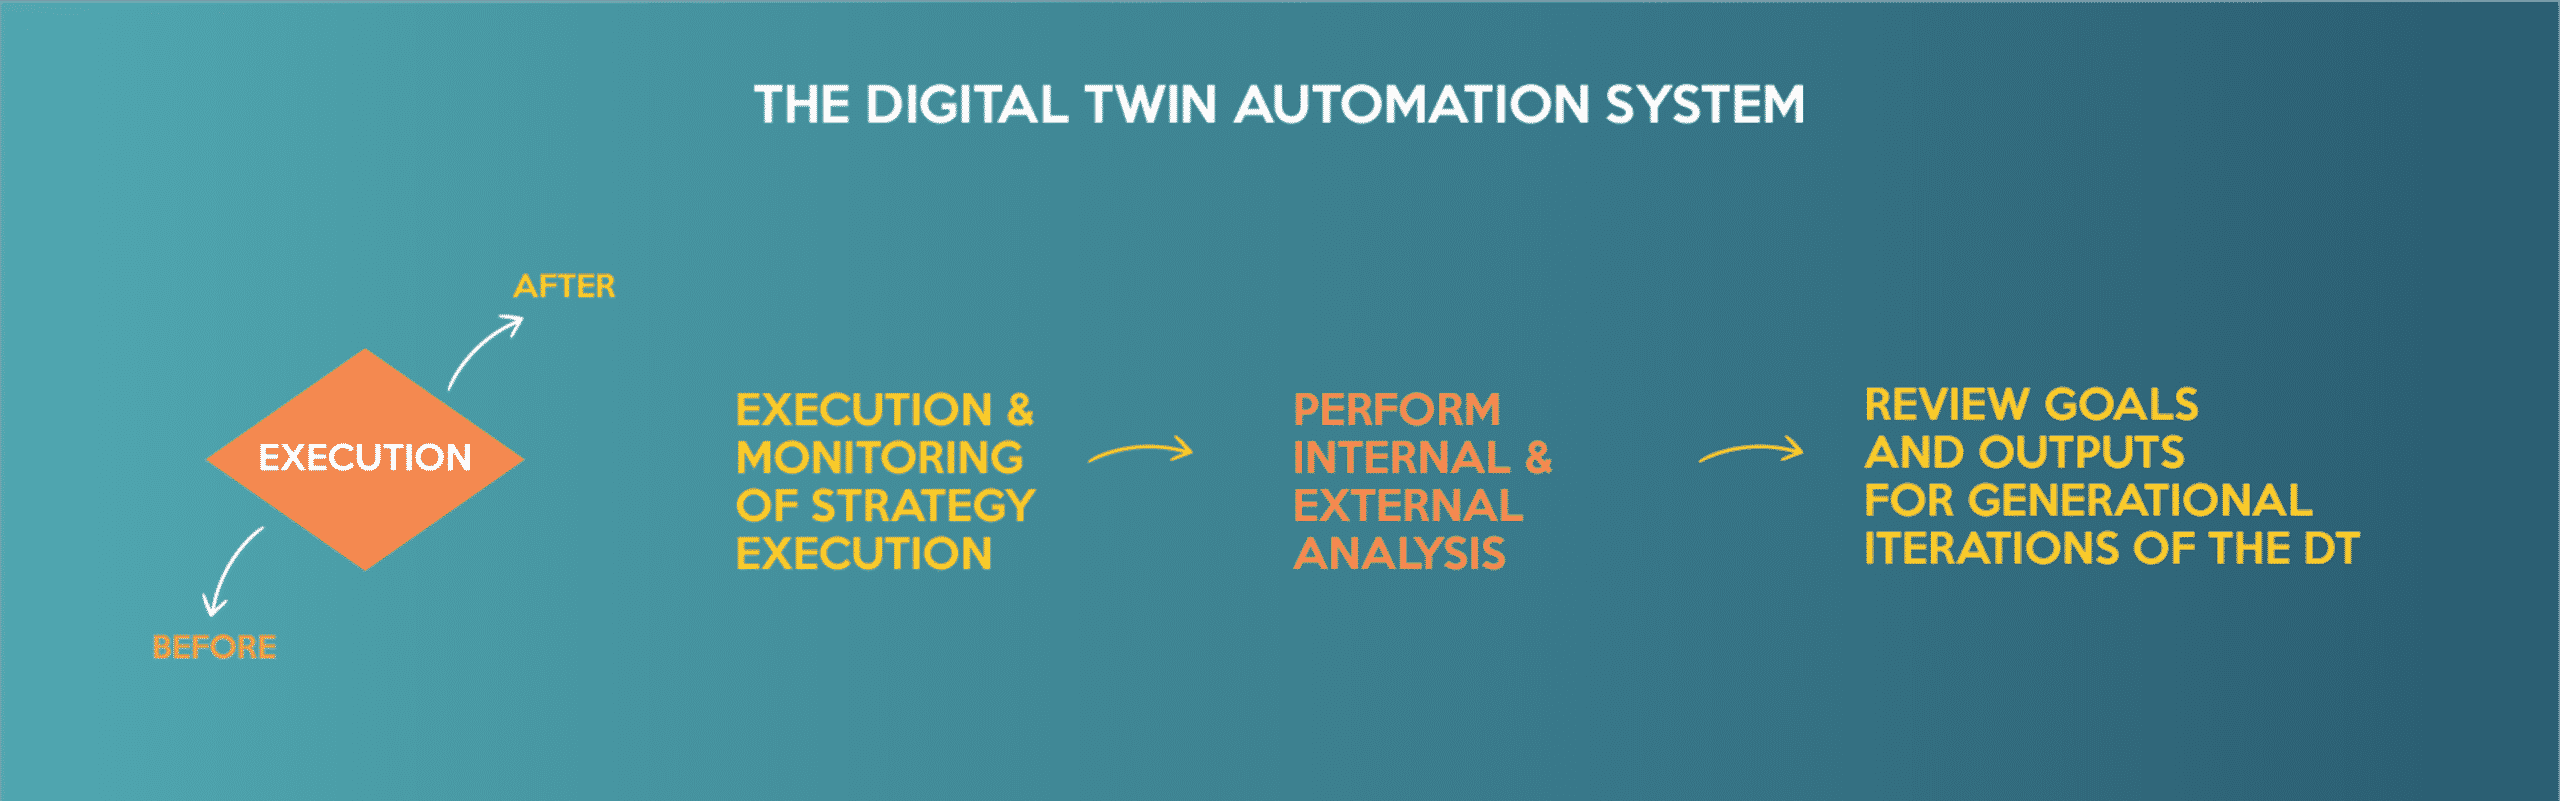 Infografico Digital Twin Automation System 3 1